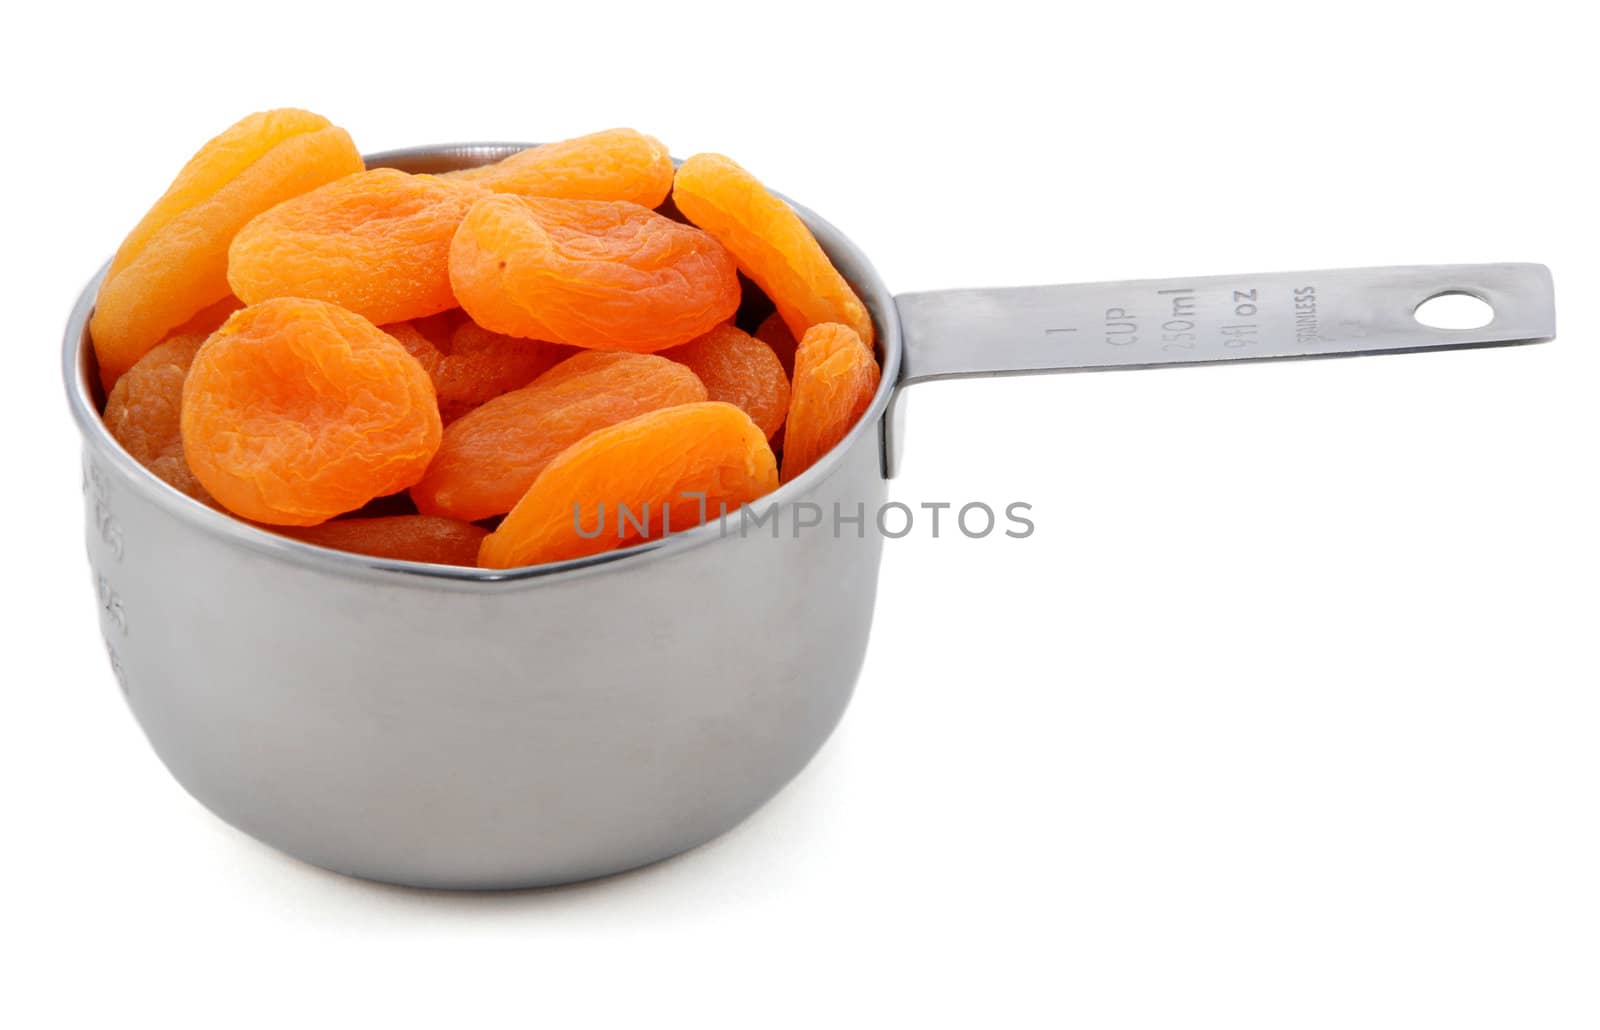 Whole dried apricots presented in an American metal cup measure, isolated on a white background